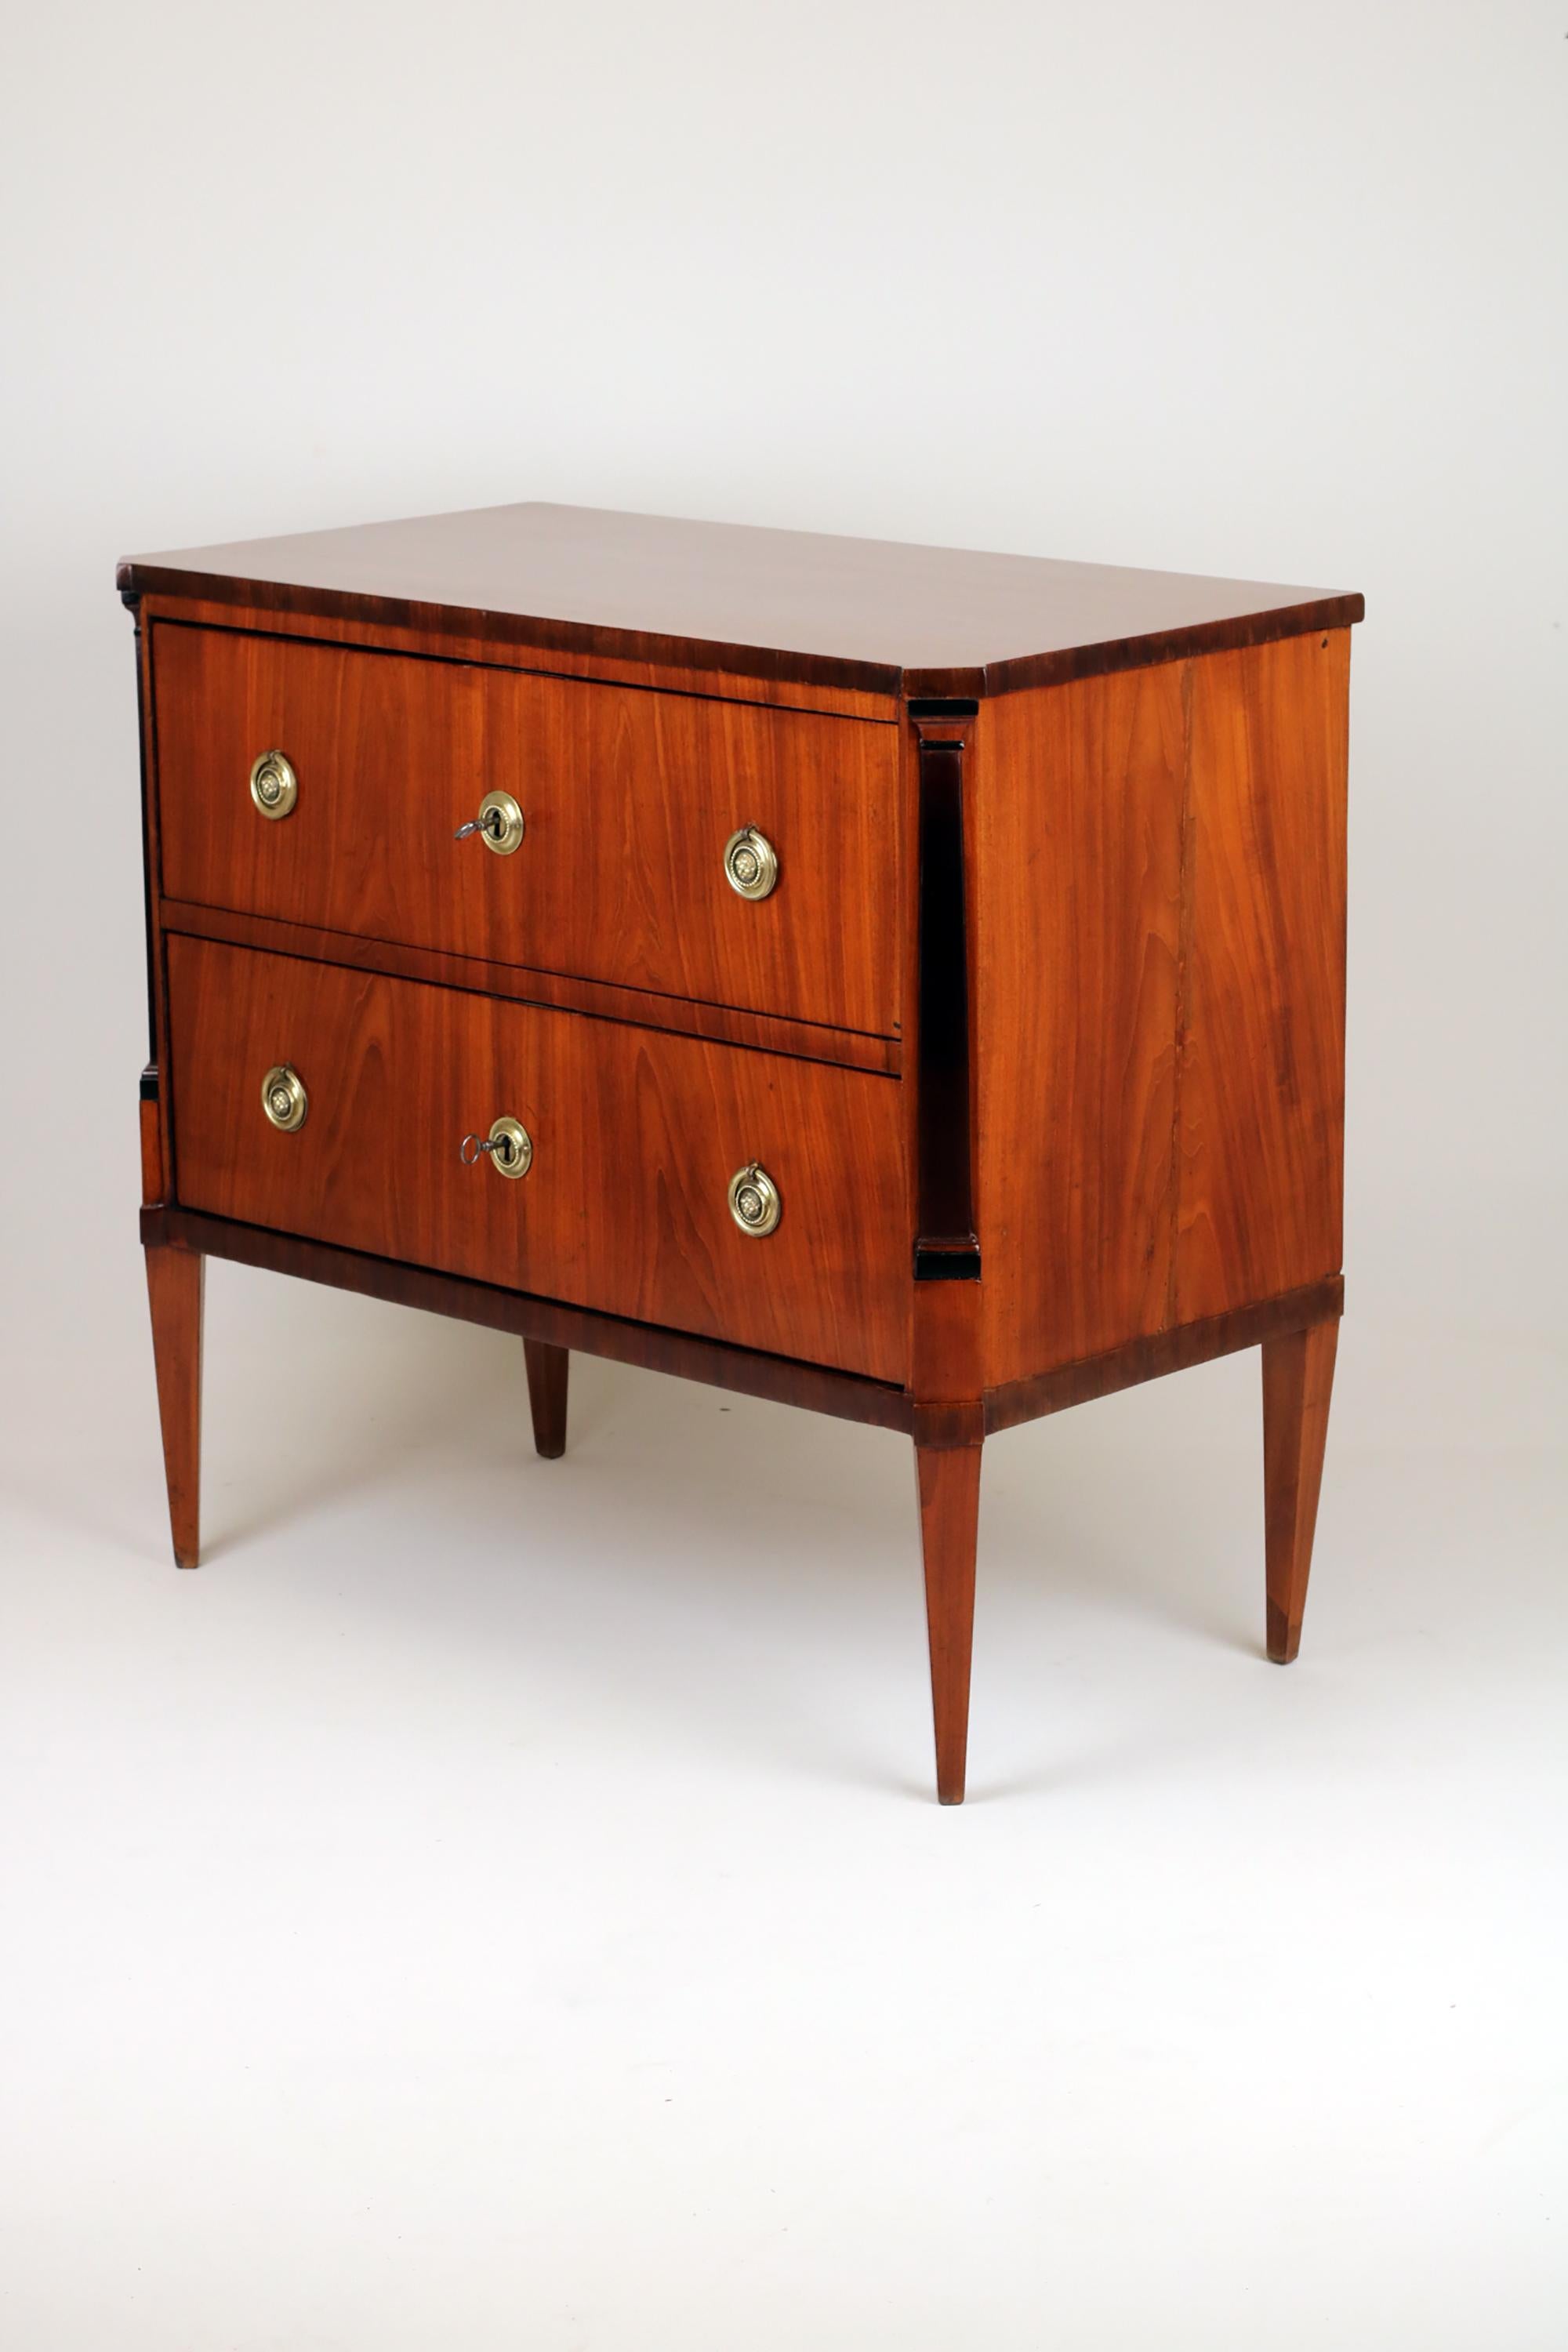 Polished Early 19th Century Louis XVI small Chest of Drawers For Sale